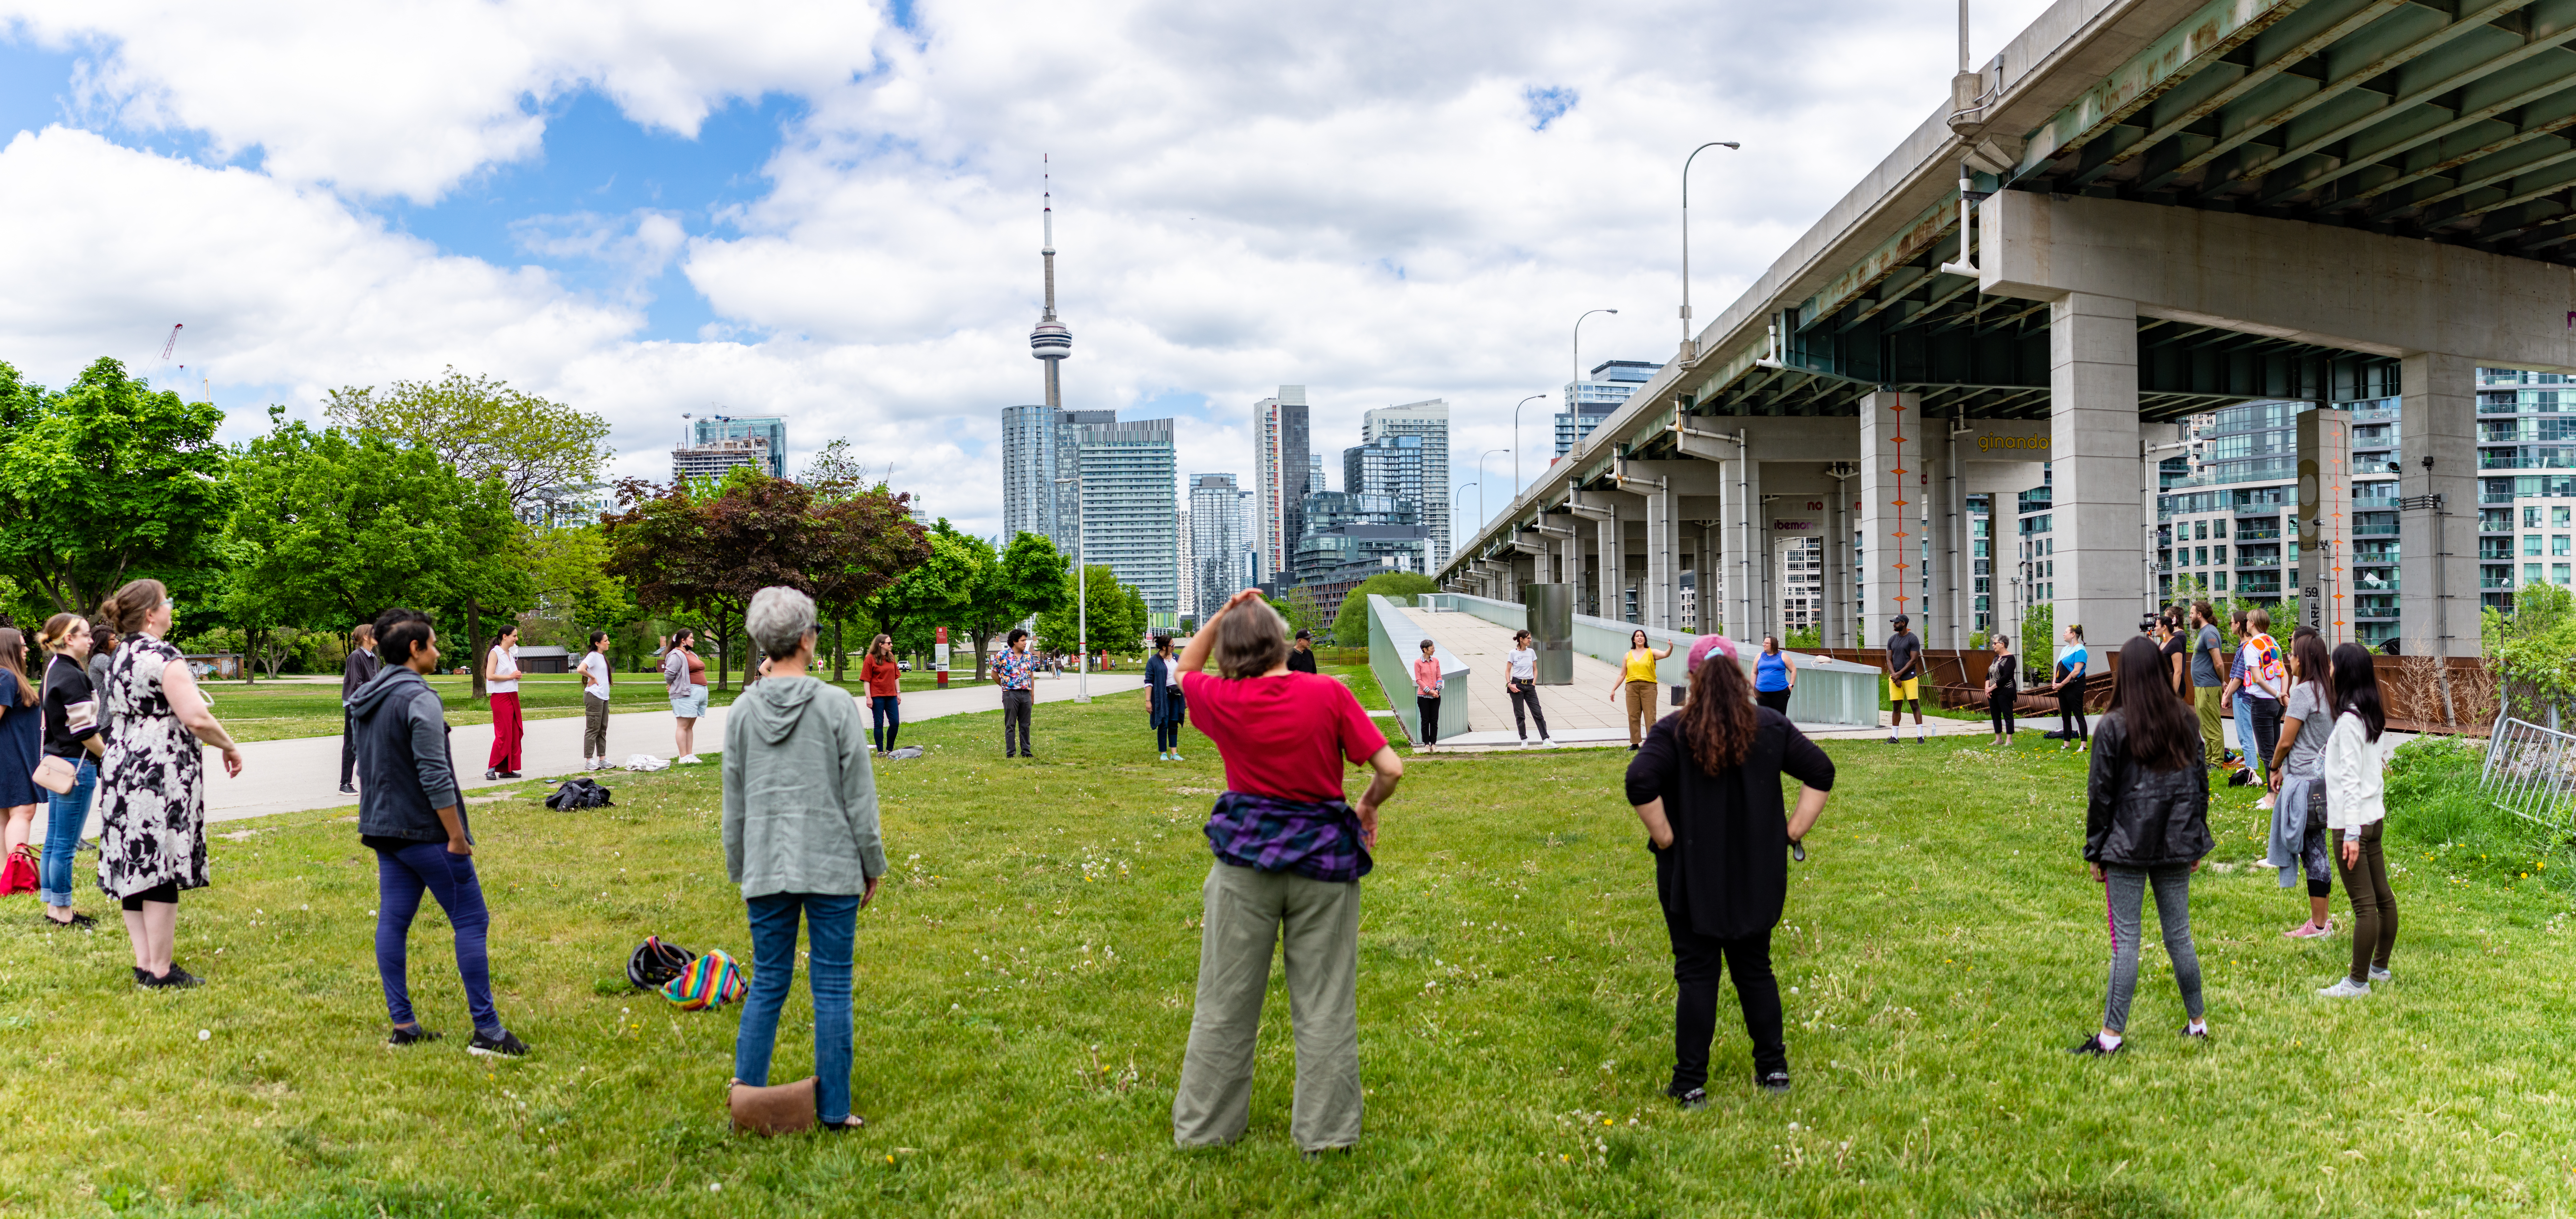 Ange Loft with Jumblies Theatre & Arts, Dish Dances Movement Workshop, a Talking Treaties movement education initiative, May 21, 2022. Program held at Fort York National Historic Site as part of Toronto Biennial of Art 2022. Photography: Rebecca Tisdelle-Macias.